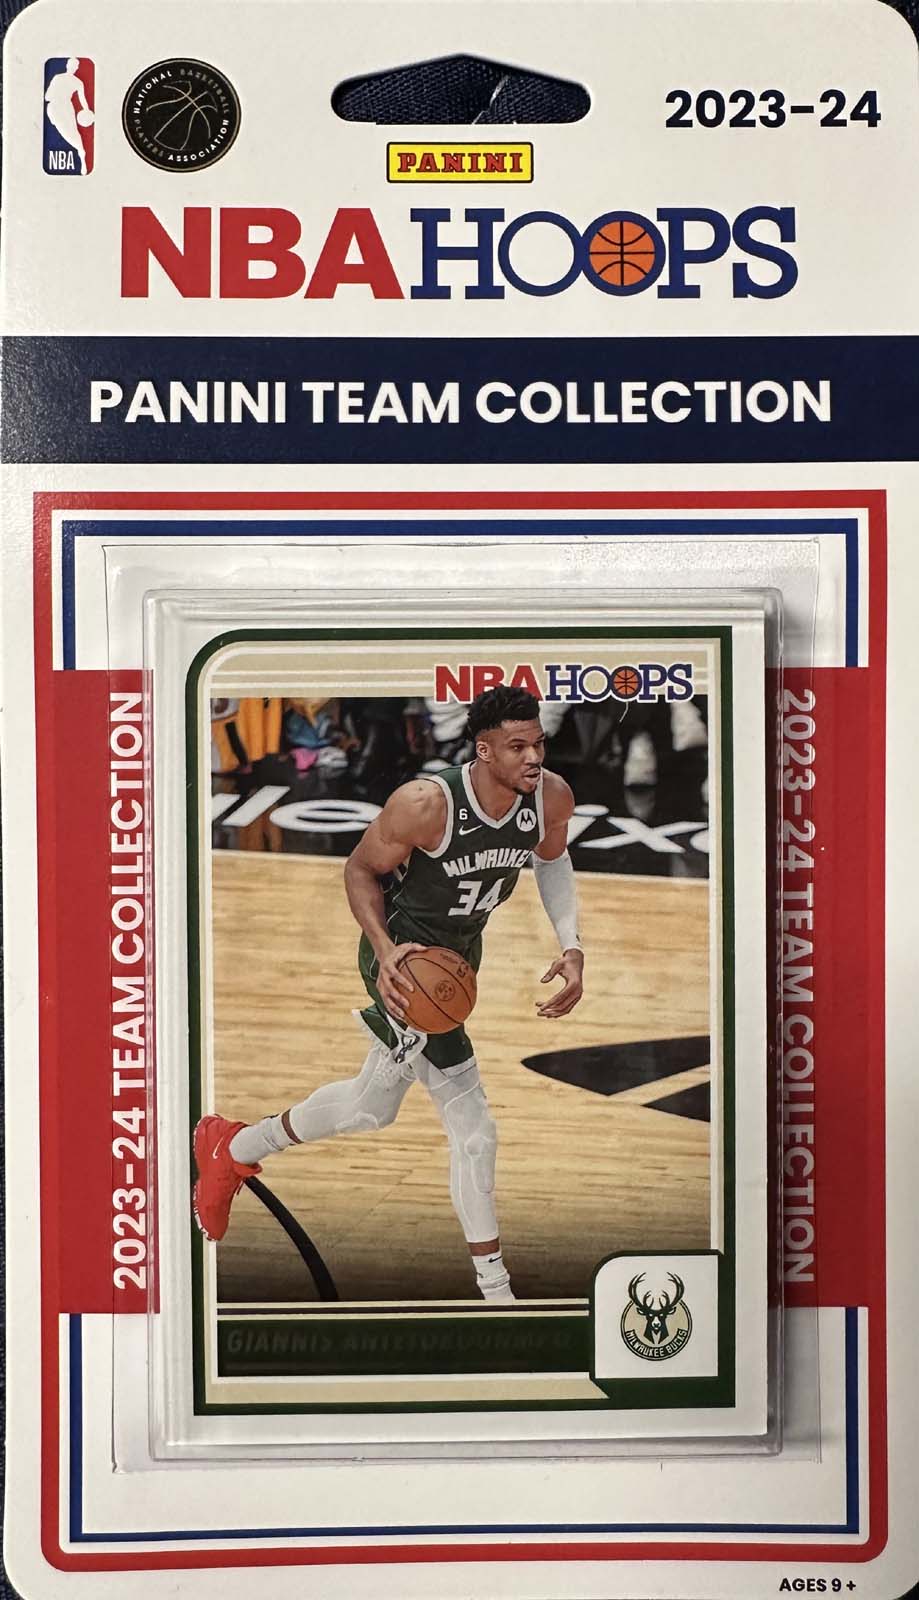 Milwaukee Bucks 2023 2024 Hoops Factory Sealed Team Set with Giannis Antetokounmpo a Rookie Card of Andre Jackson Jr. Plus